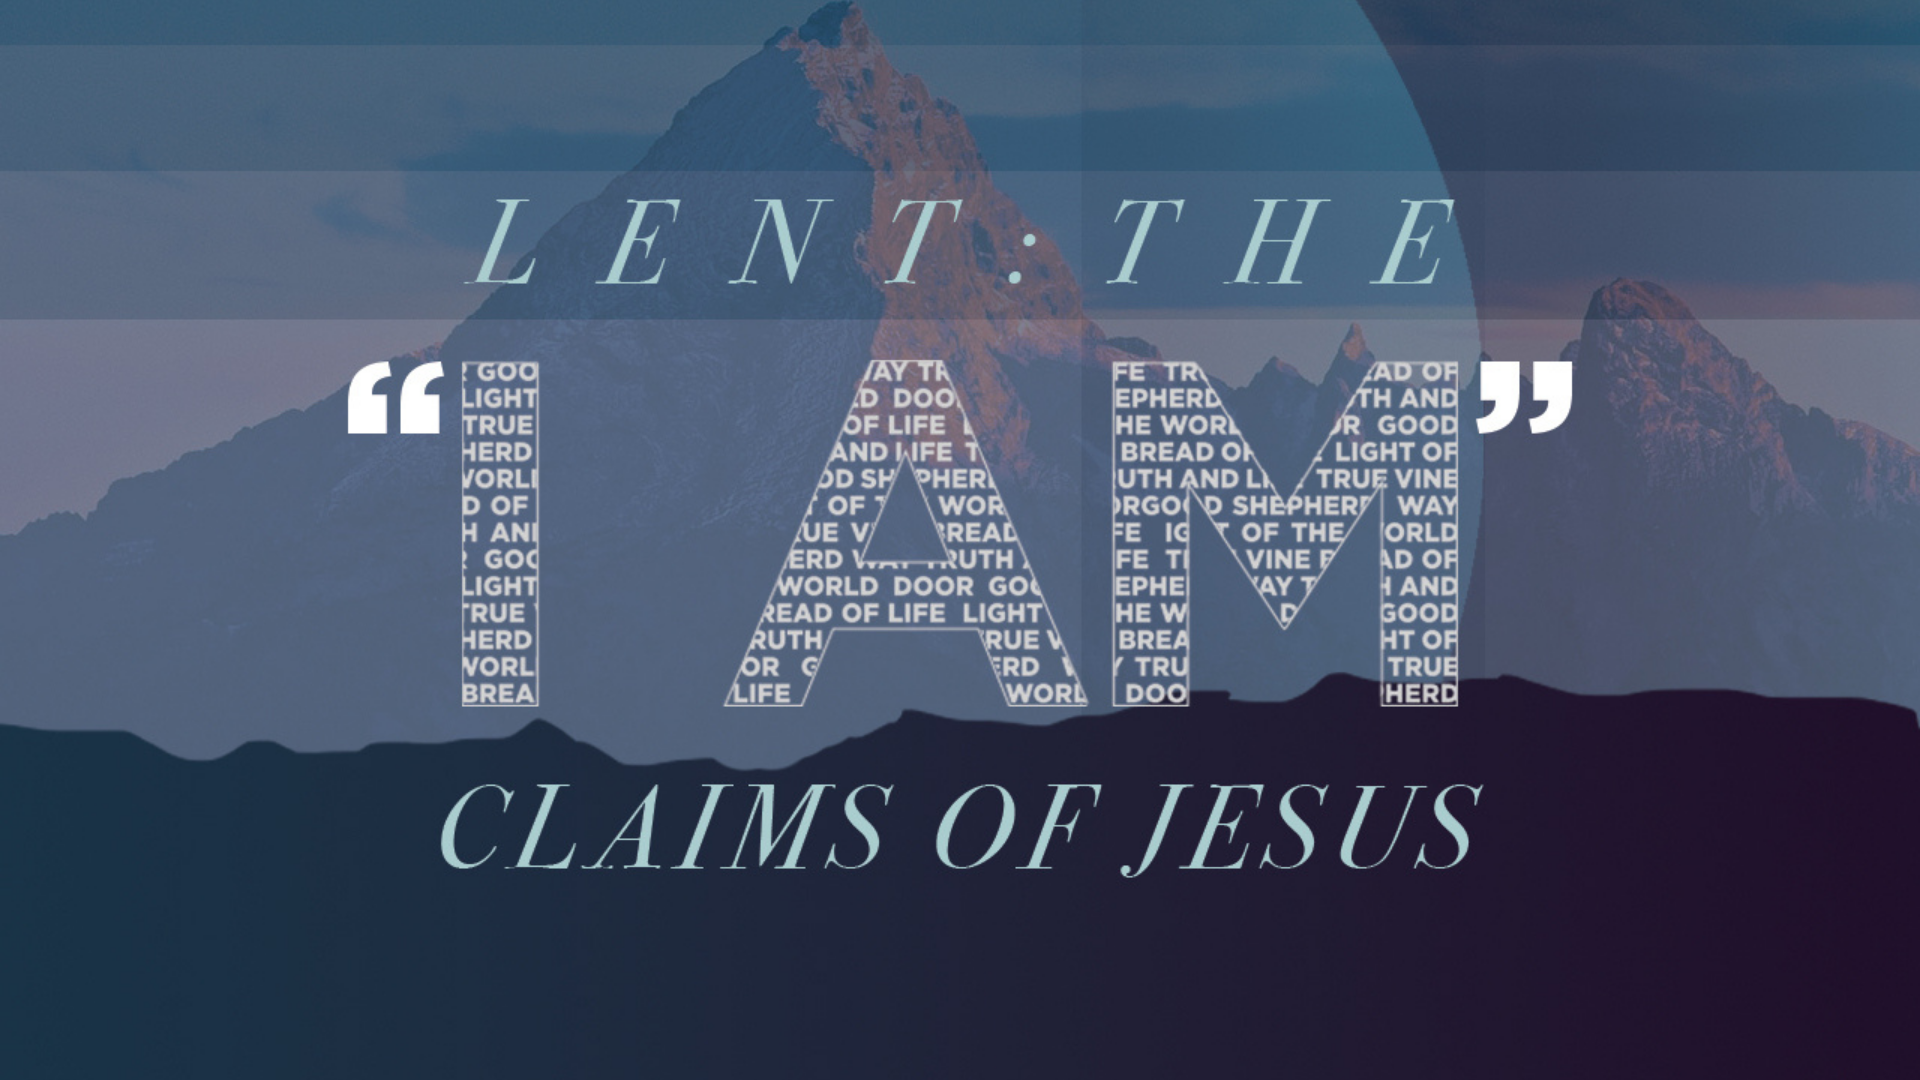 Lent: The "I Am" Claims of Jesus